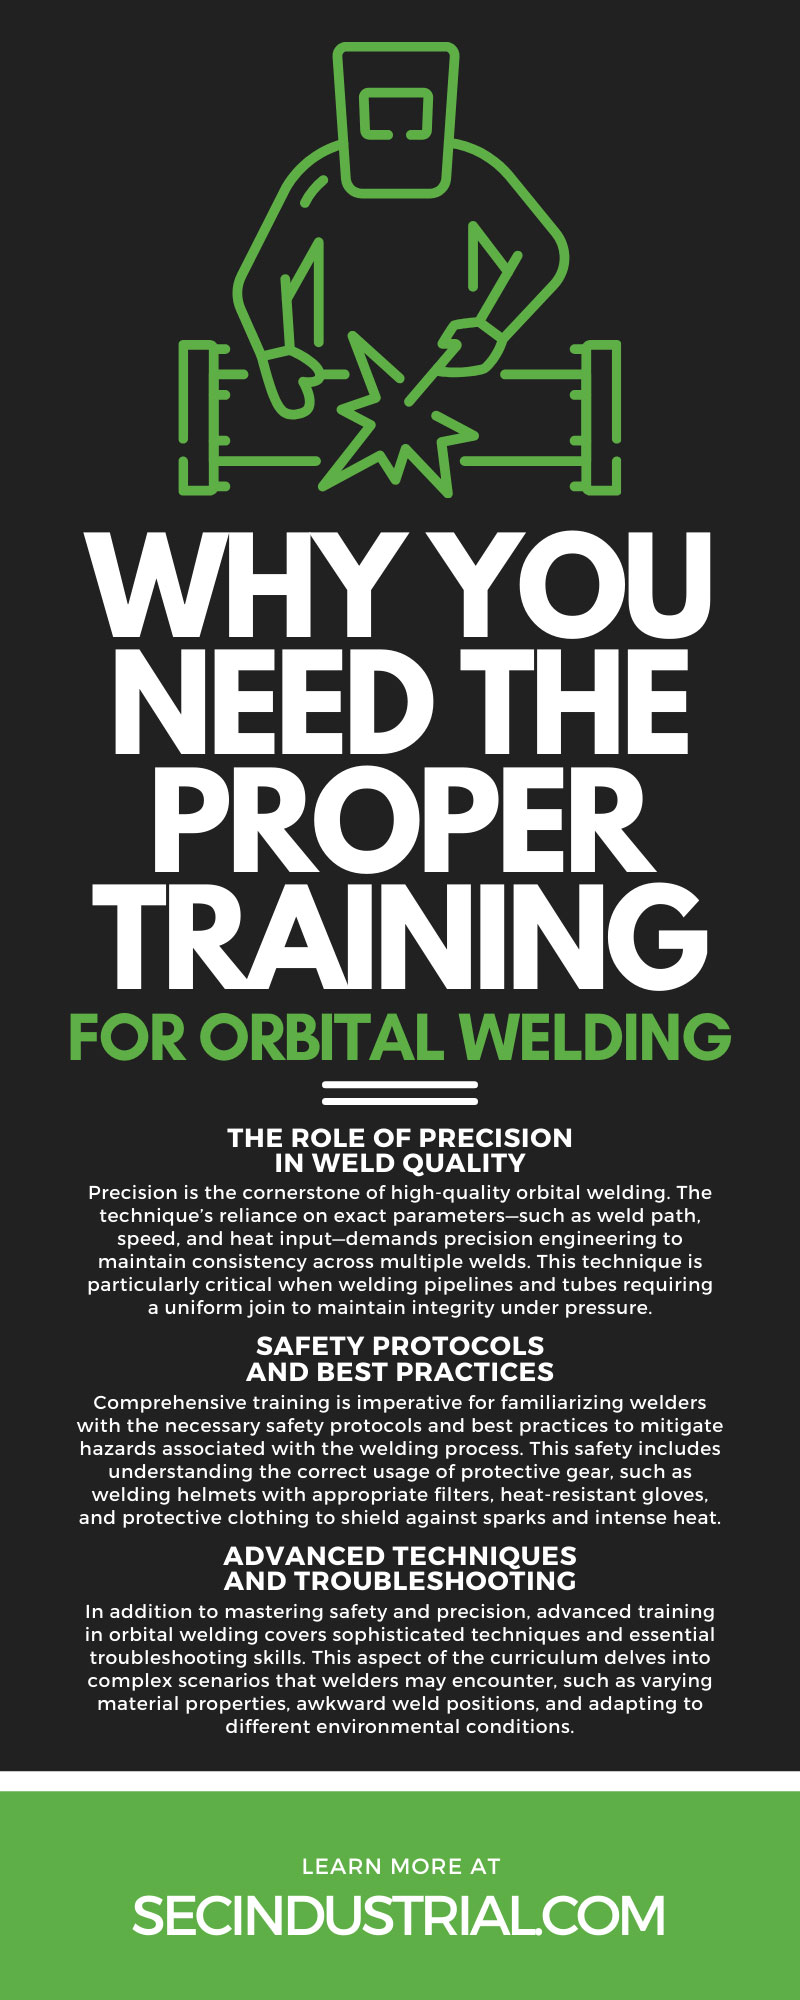 Why You Need the Proper Training for Orbital Welding